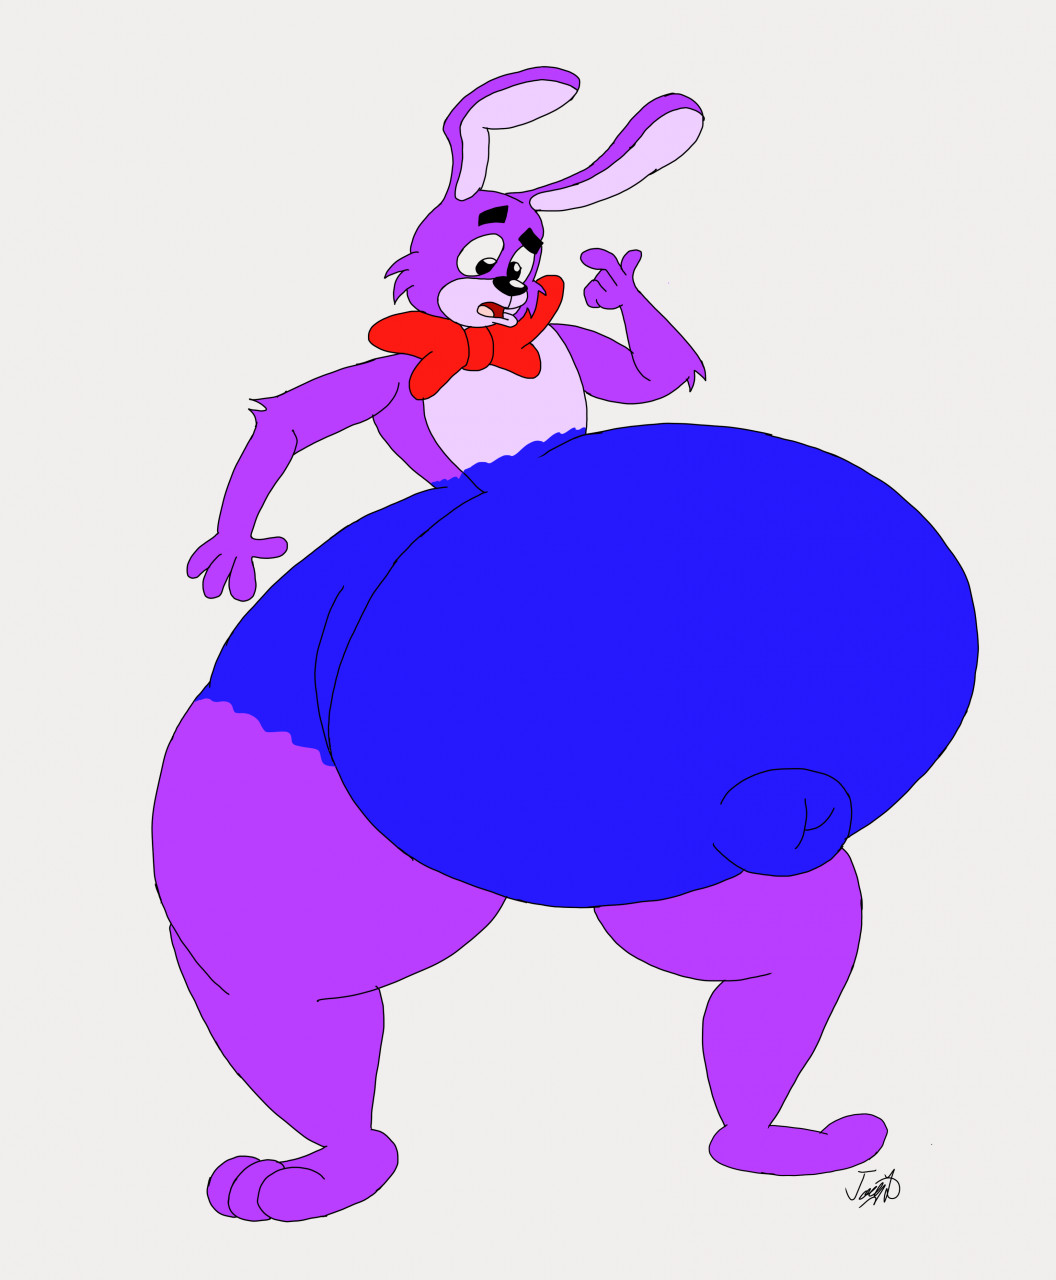 Bonnie becoming berry by Joe-Anthro -- Fur Affinity [dot] net